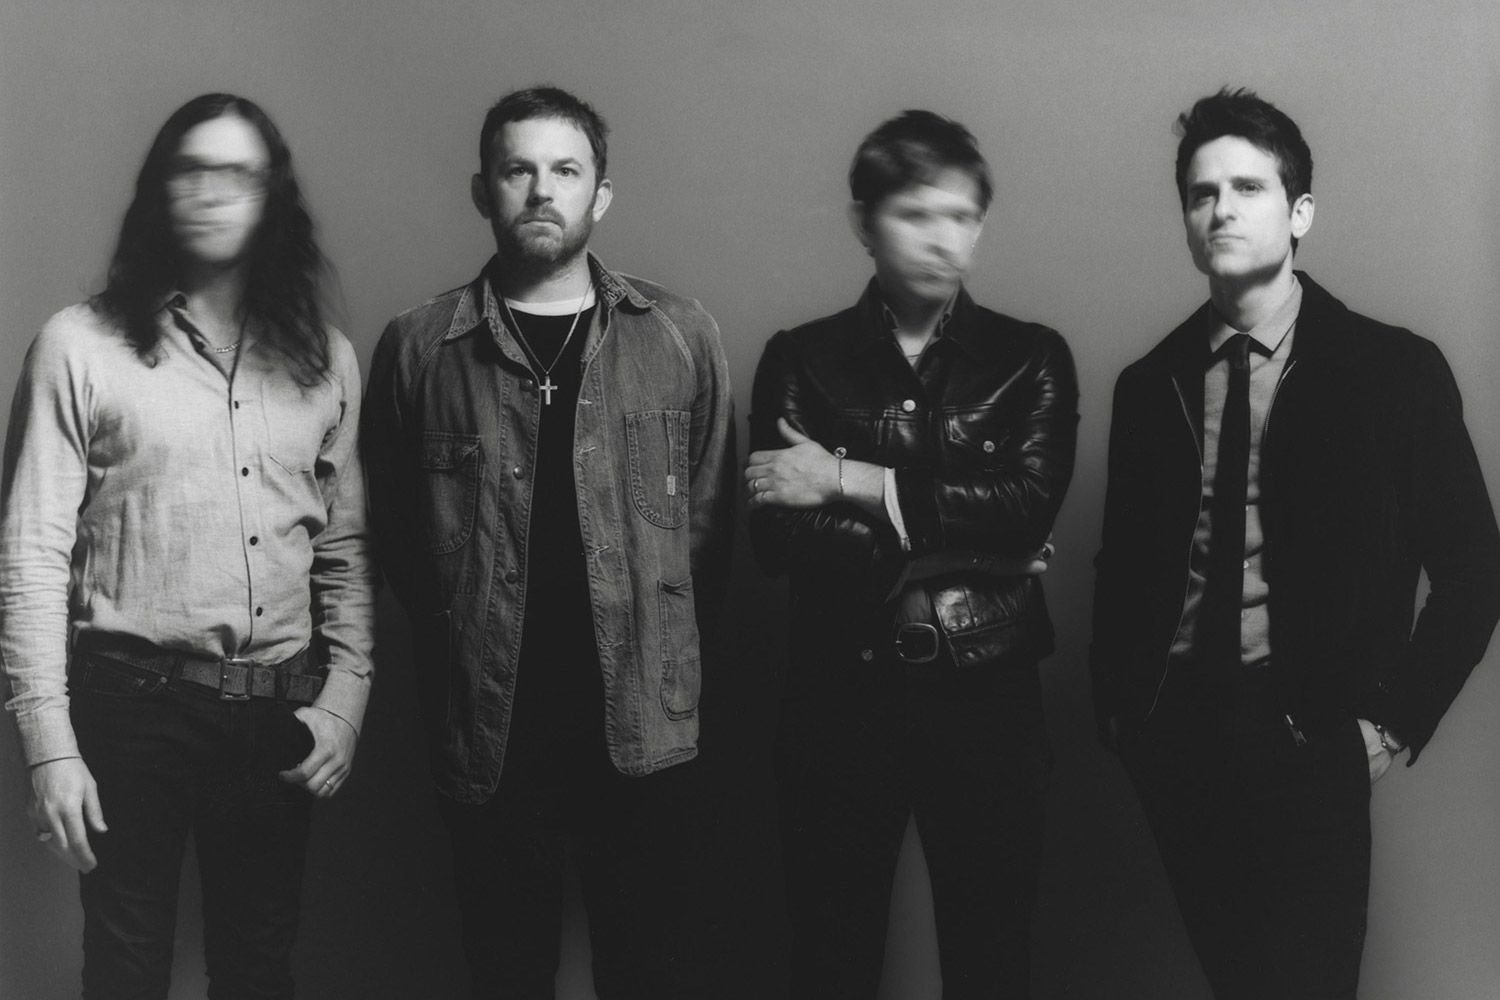 Kings of Leon Makes History with Auction of First Music NFT to Go Into Space with Inspiration4